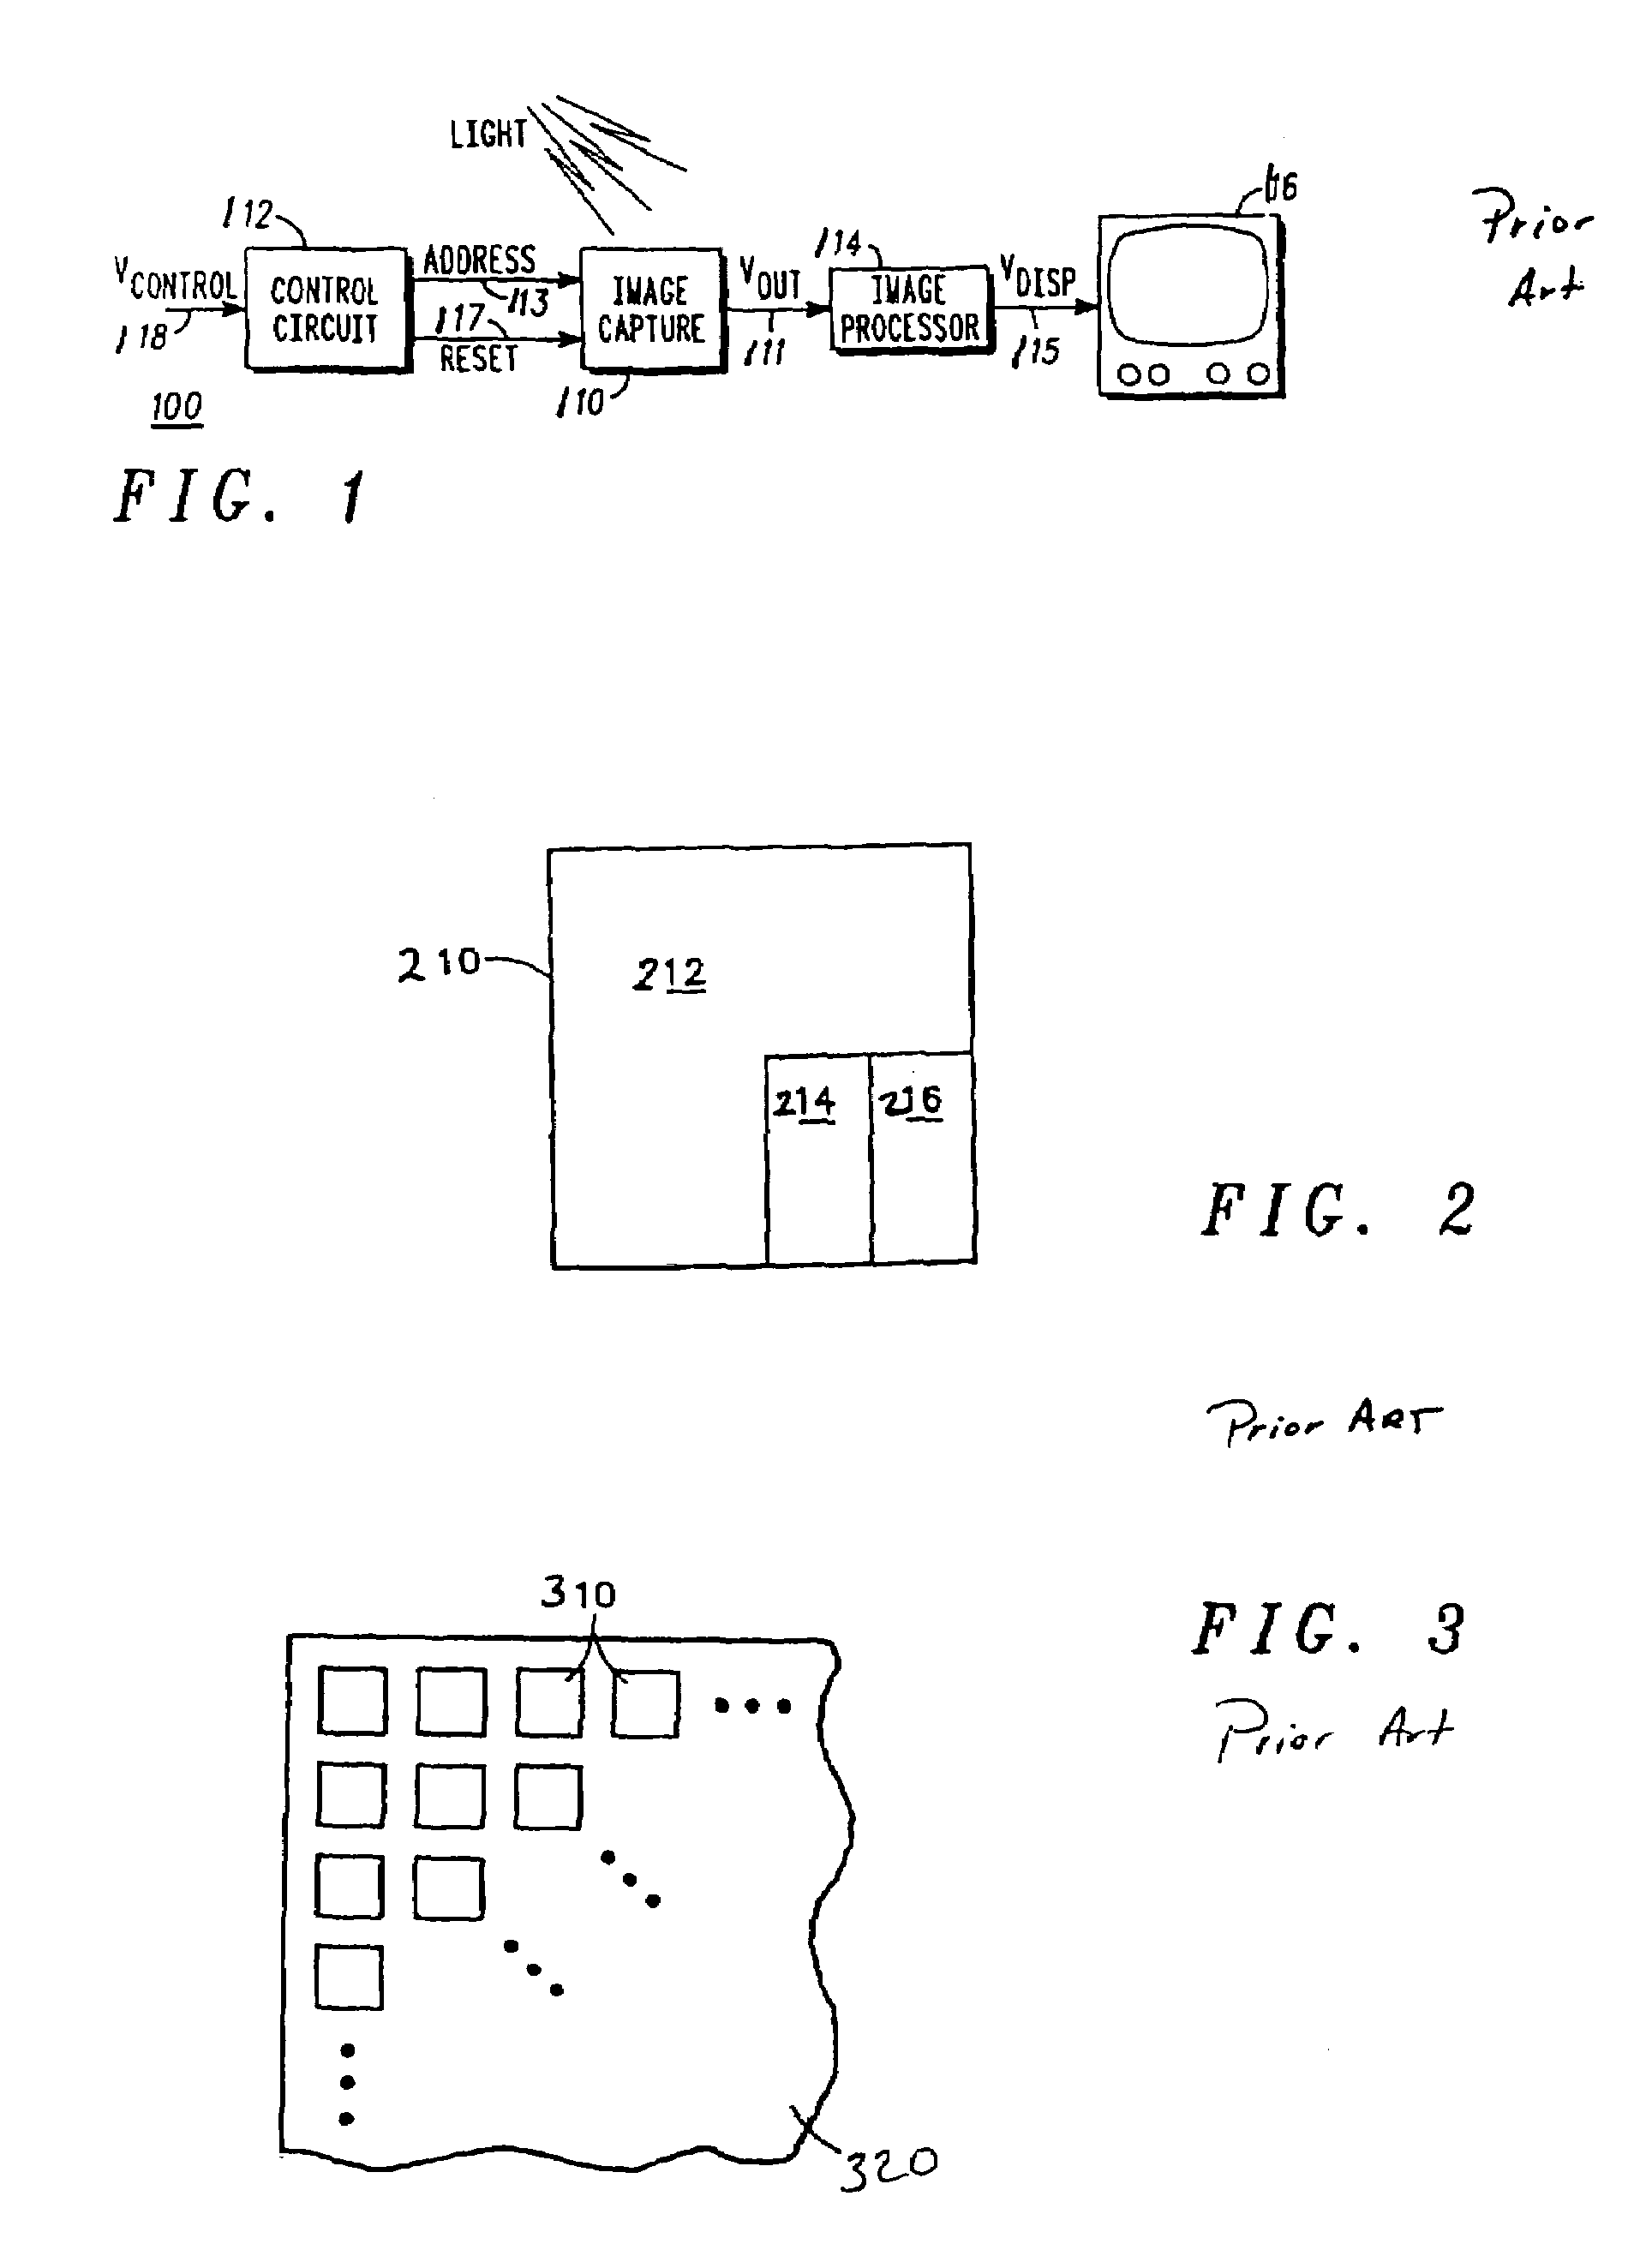 Self-calibrating anti-blooming circuit for CMOS image sensor having a spillover protection performance in response to a spillover condition